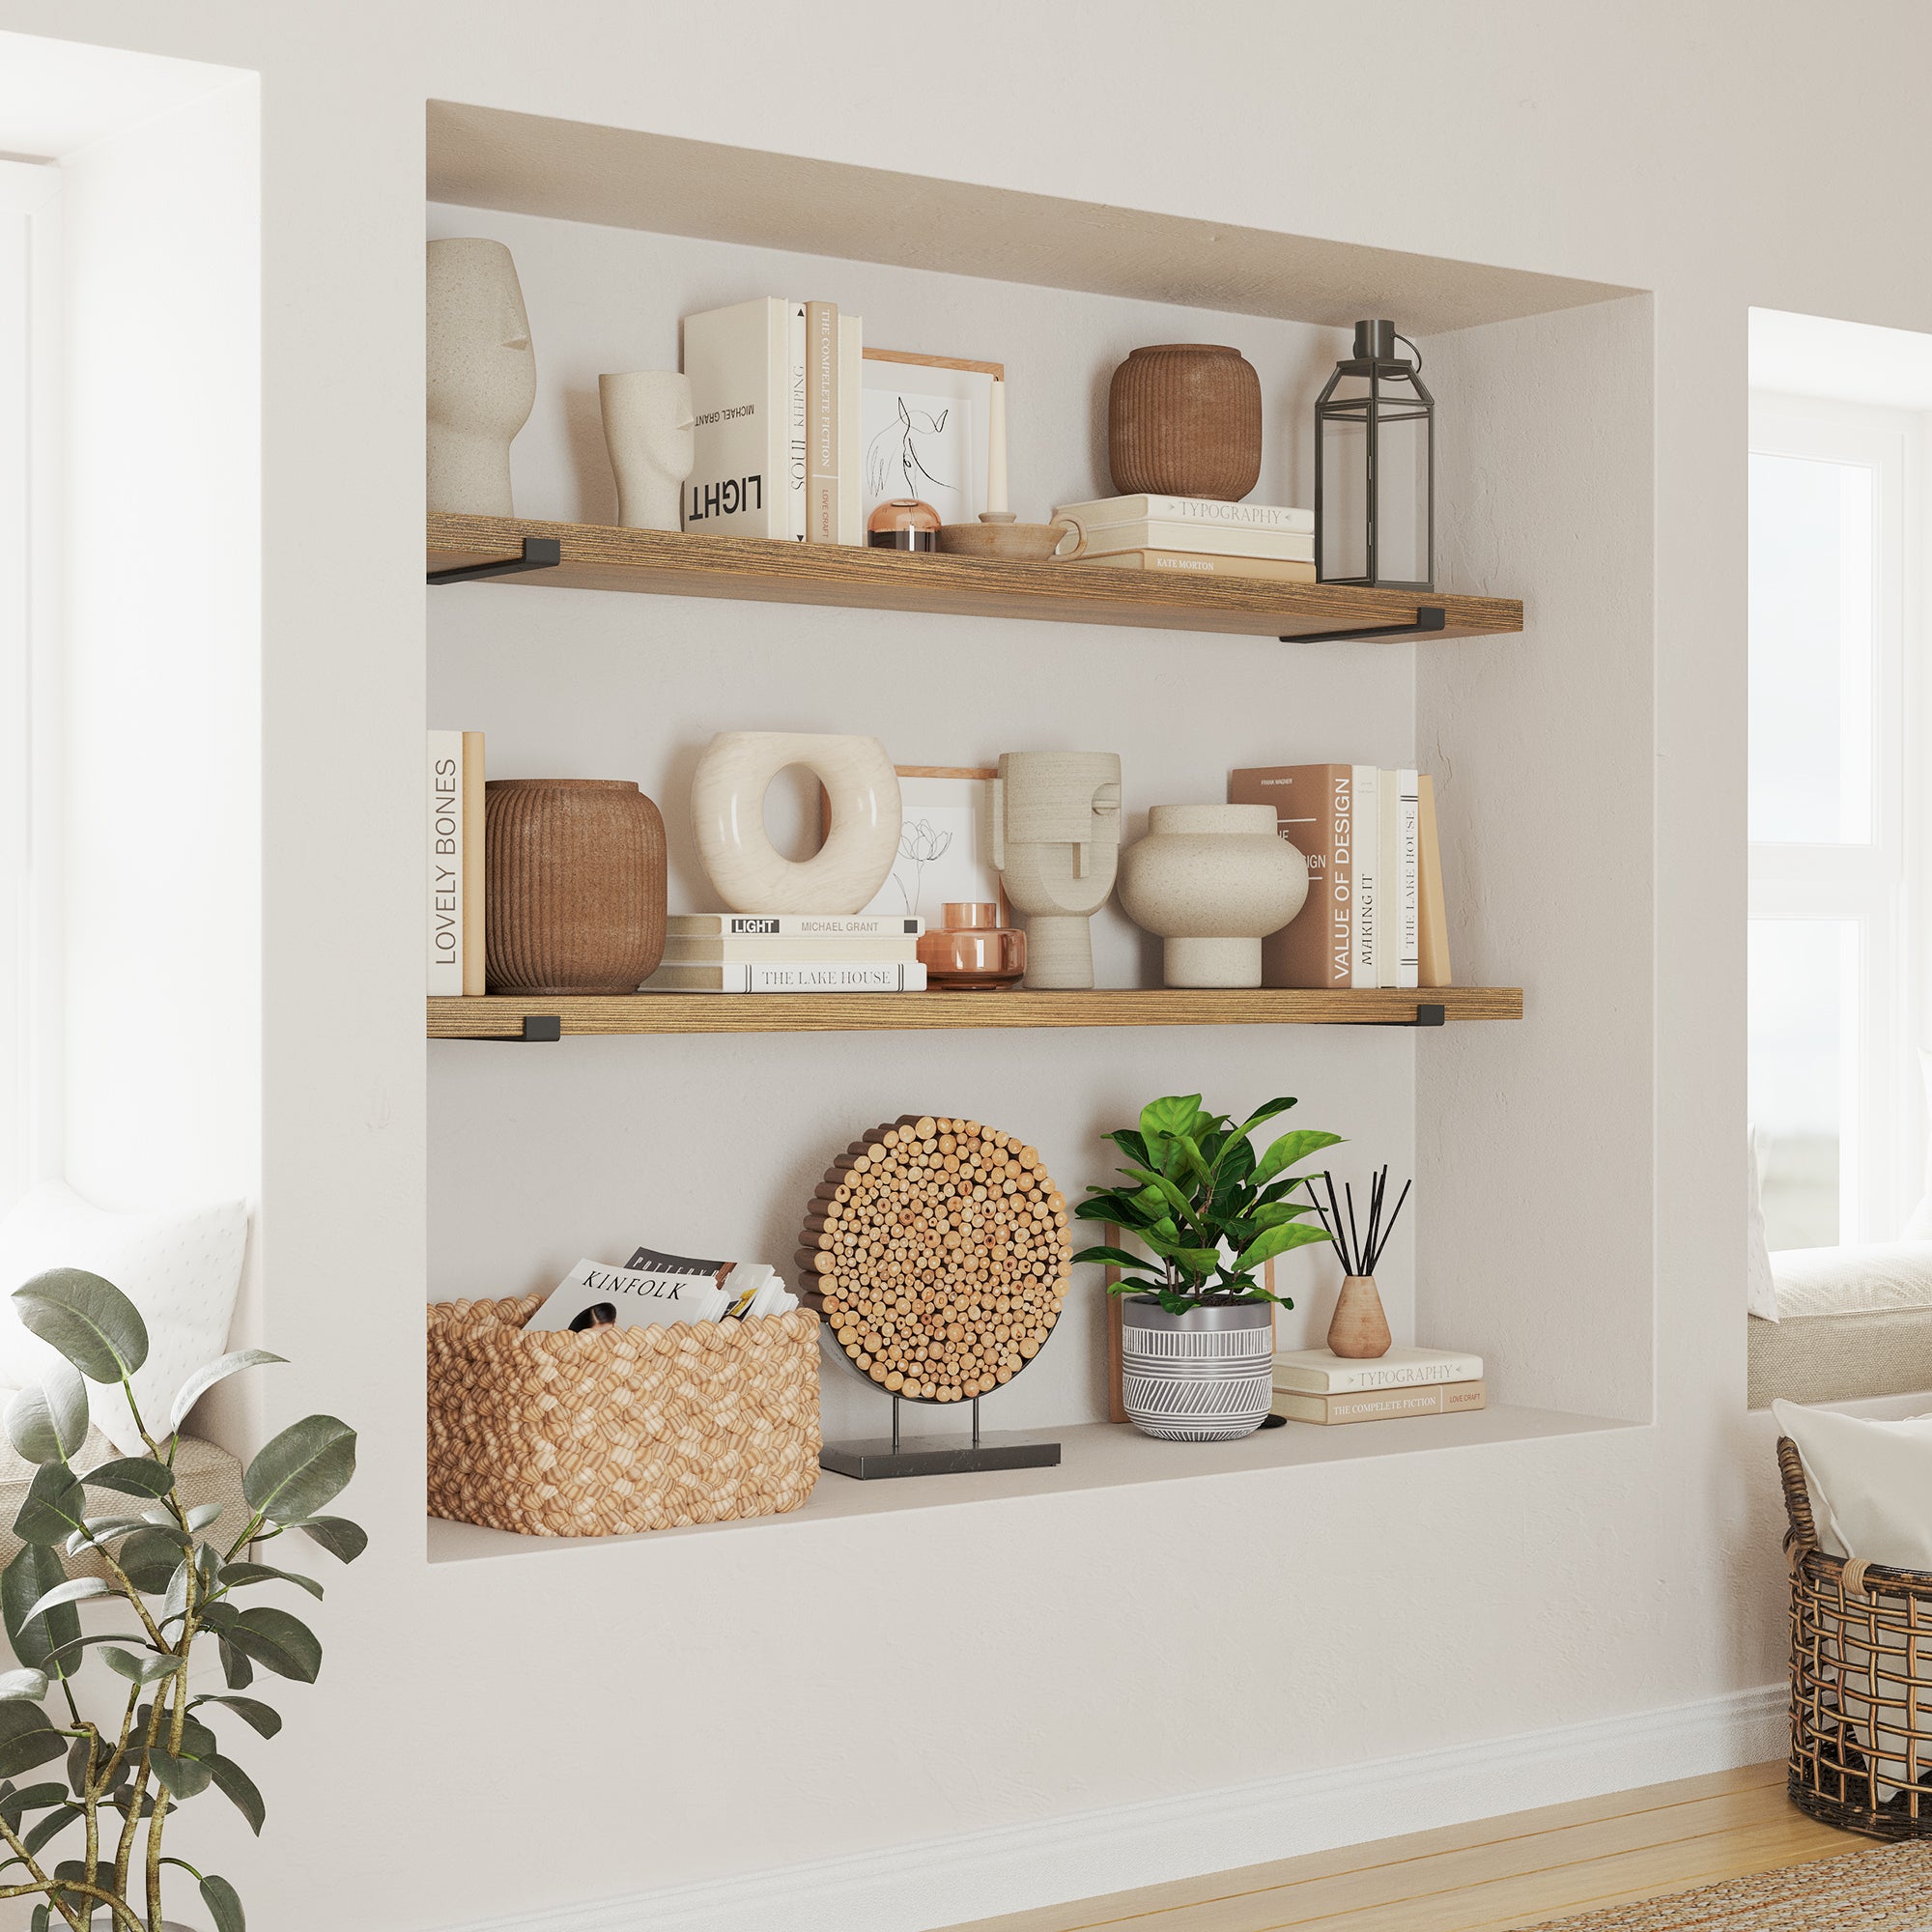 Stylish hanging shelves burnt displaying a collection of books, vases, and decorative items, arranged neatly within a recessed wall nook.